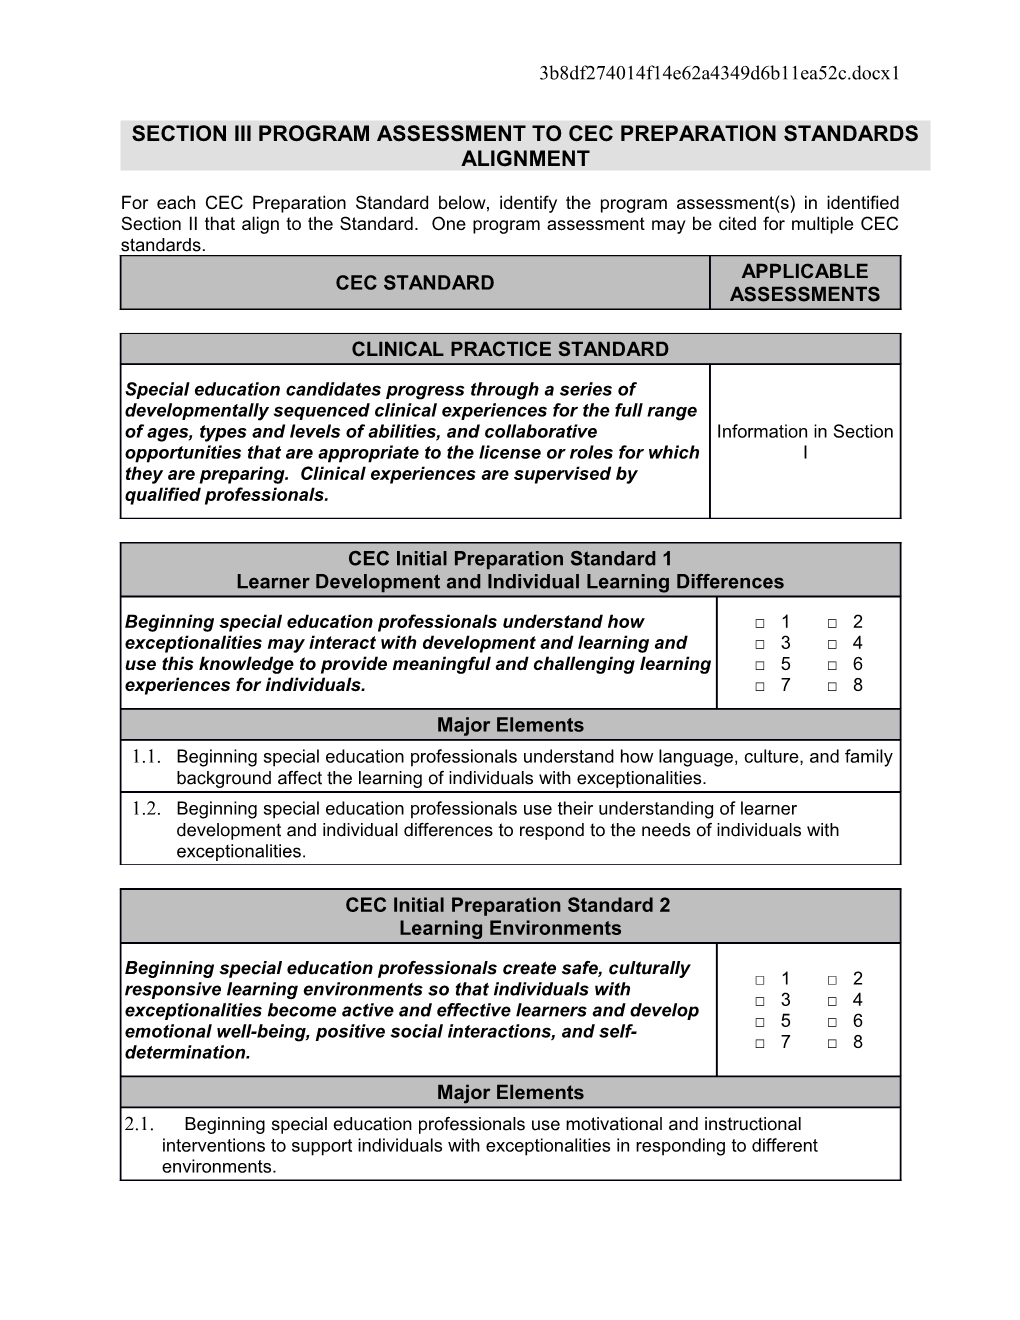 Section Iii Relationship of Assessment to Standards